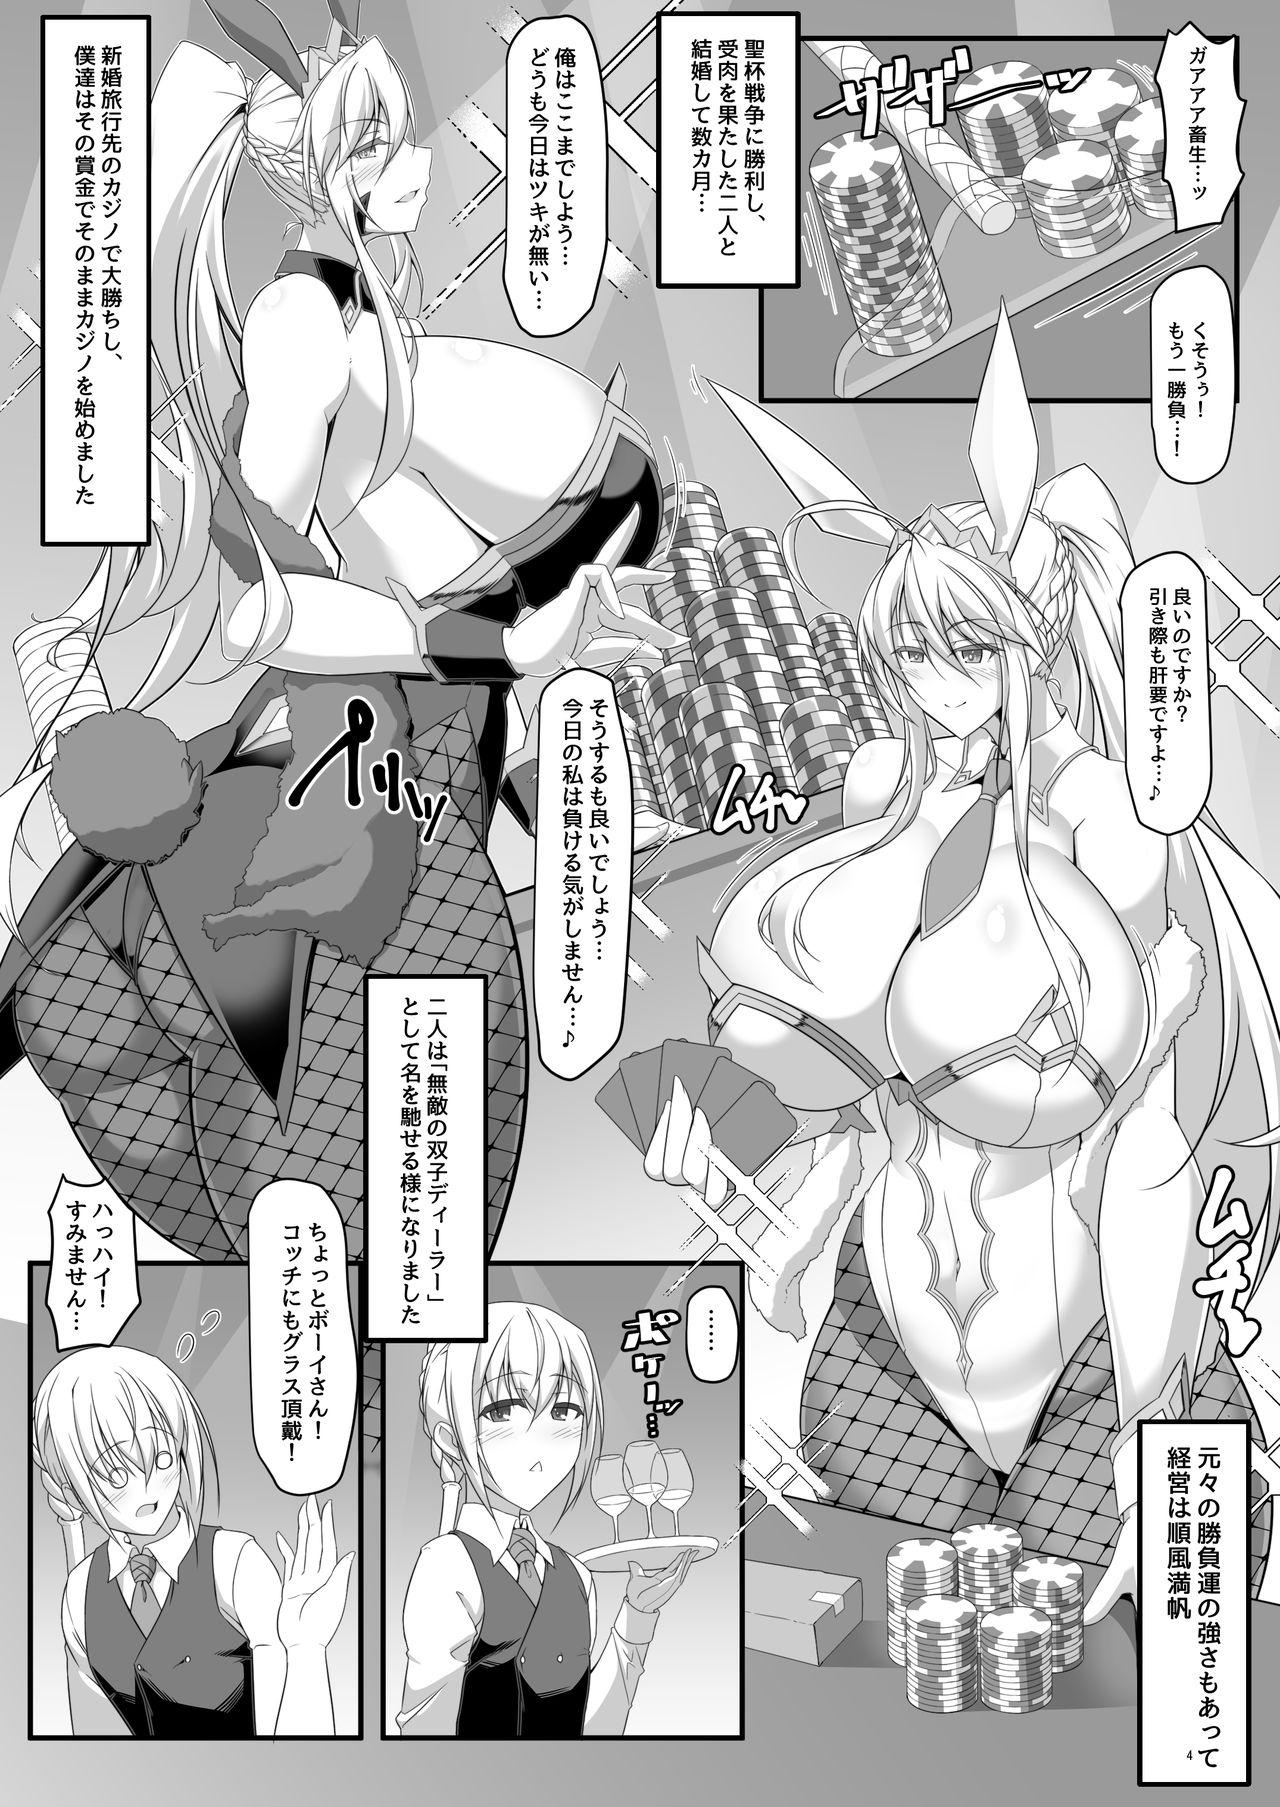 Ass To Mouth Souou to Maguau II - Fate grand order Shaven - Page 4